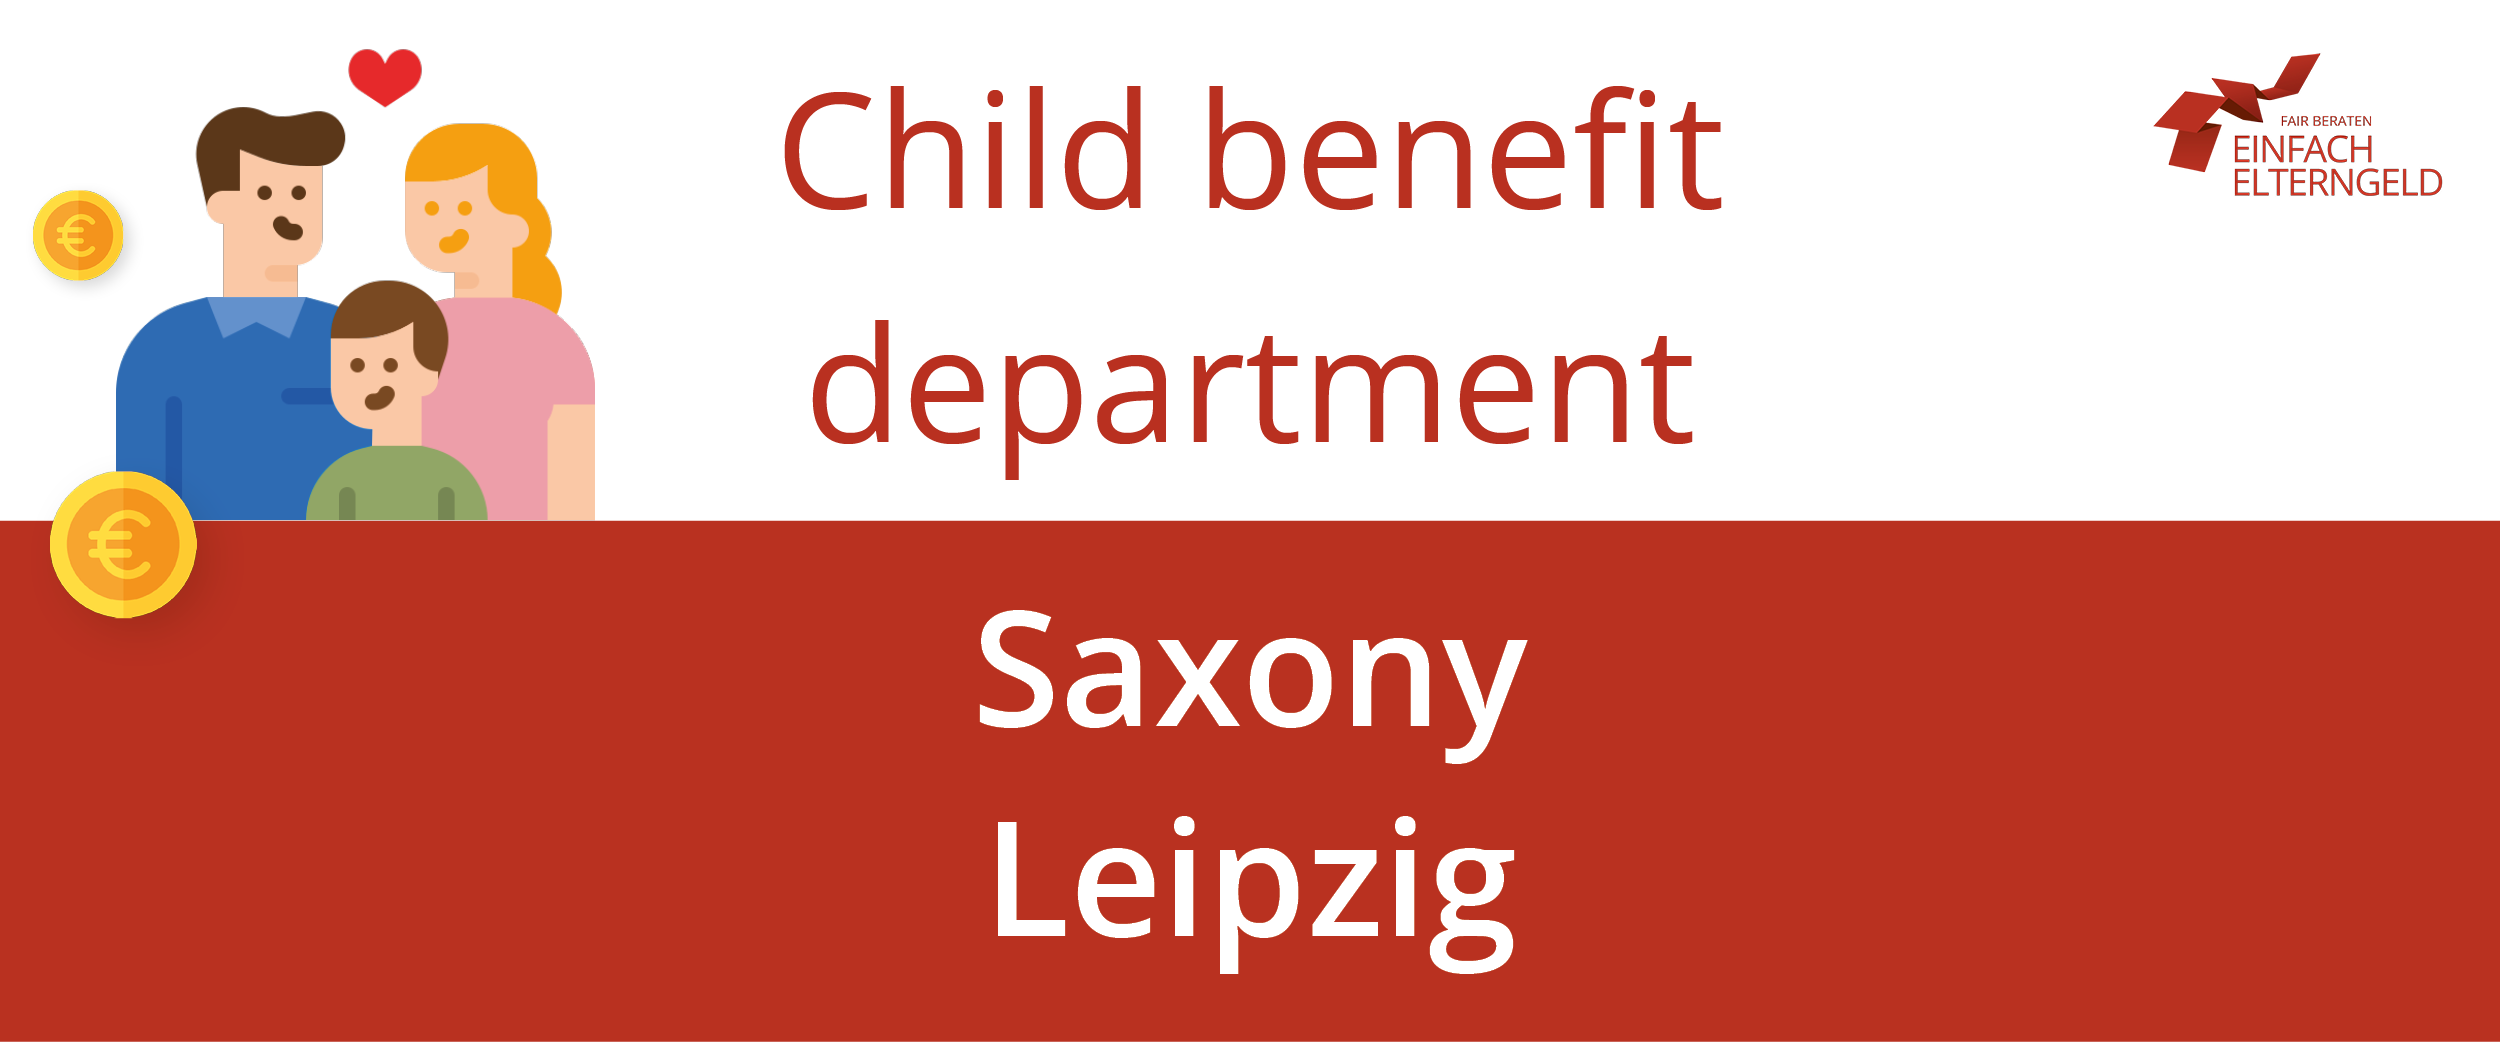 We present you the Child benefit department Saxony Leipzig.